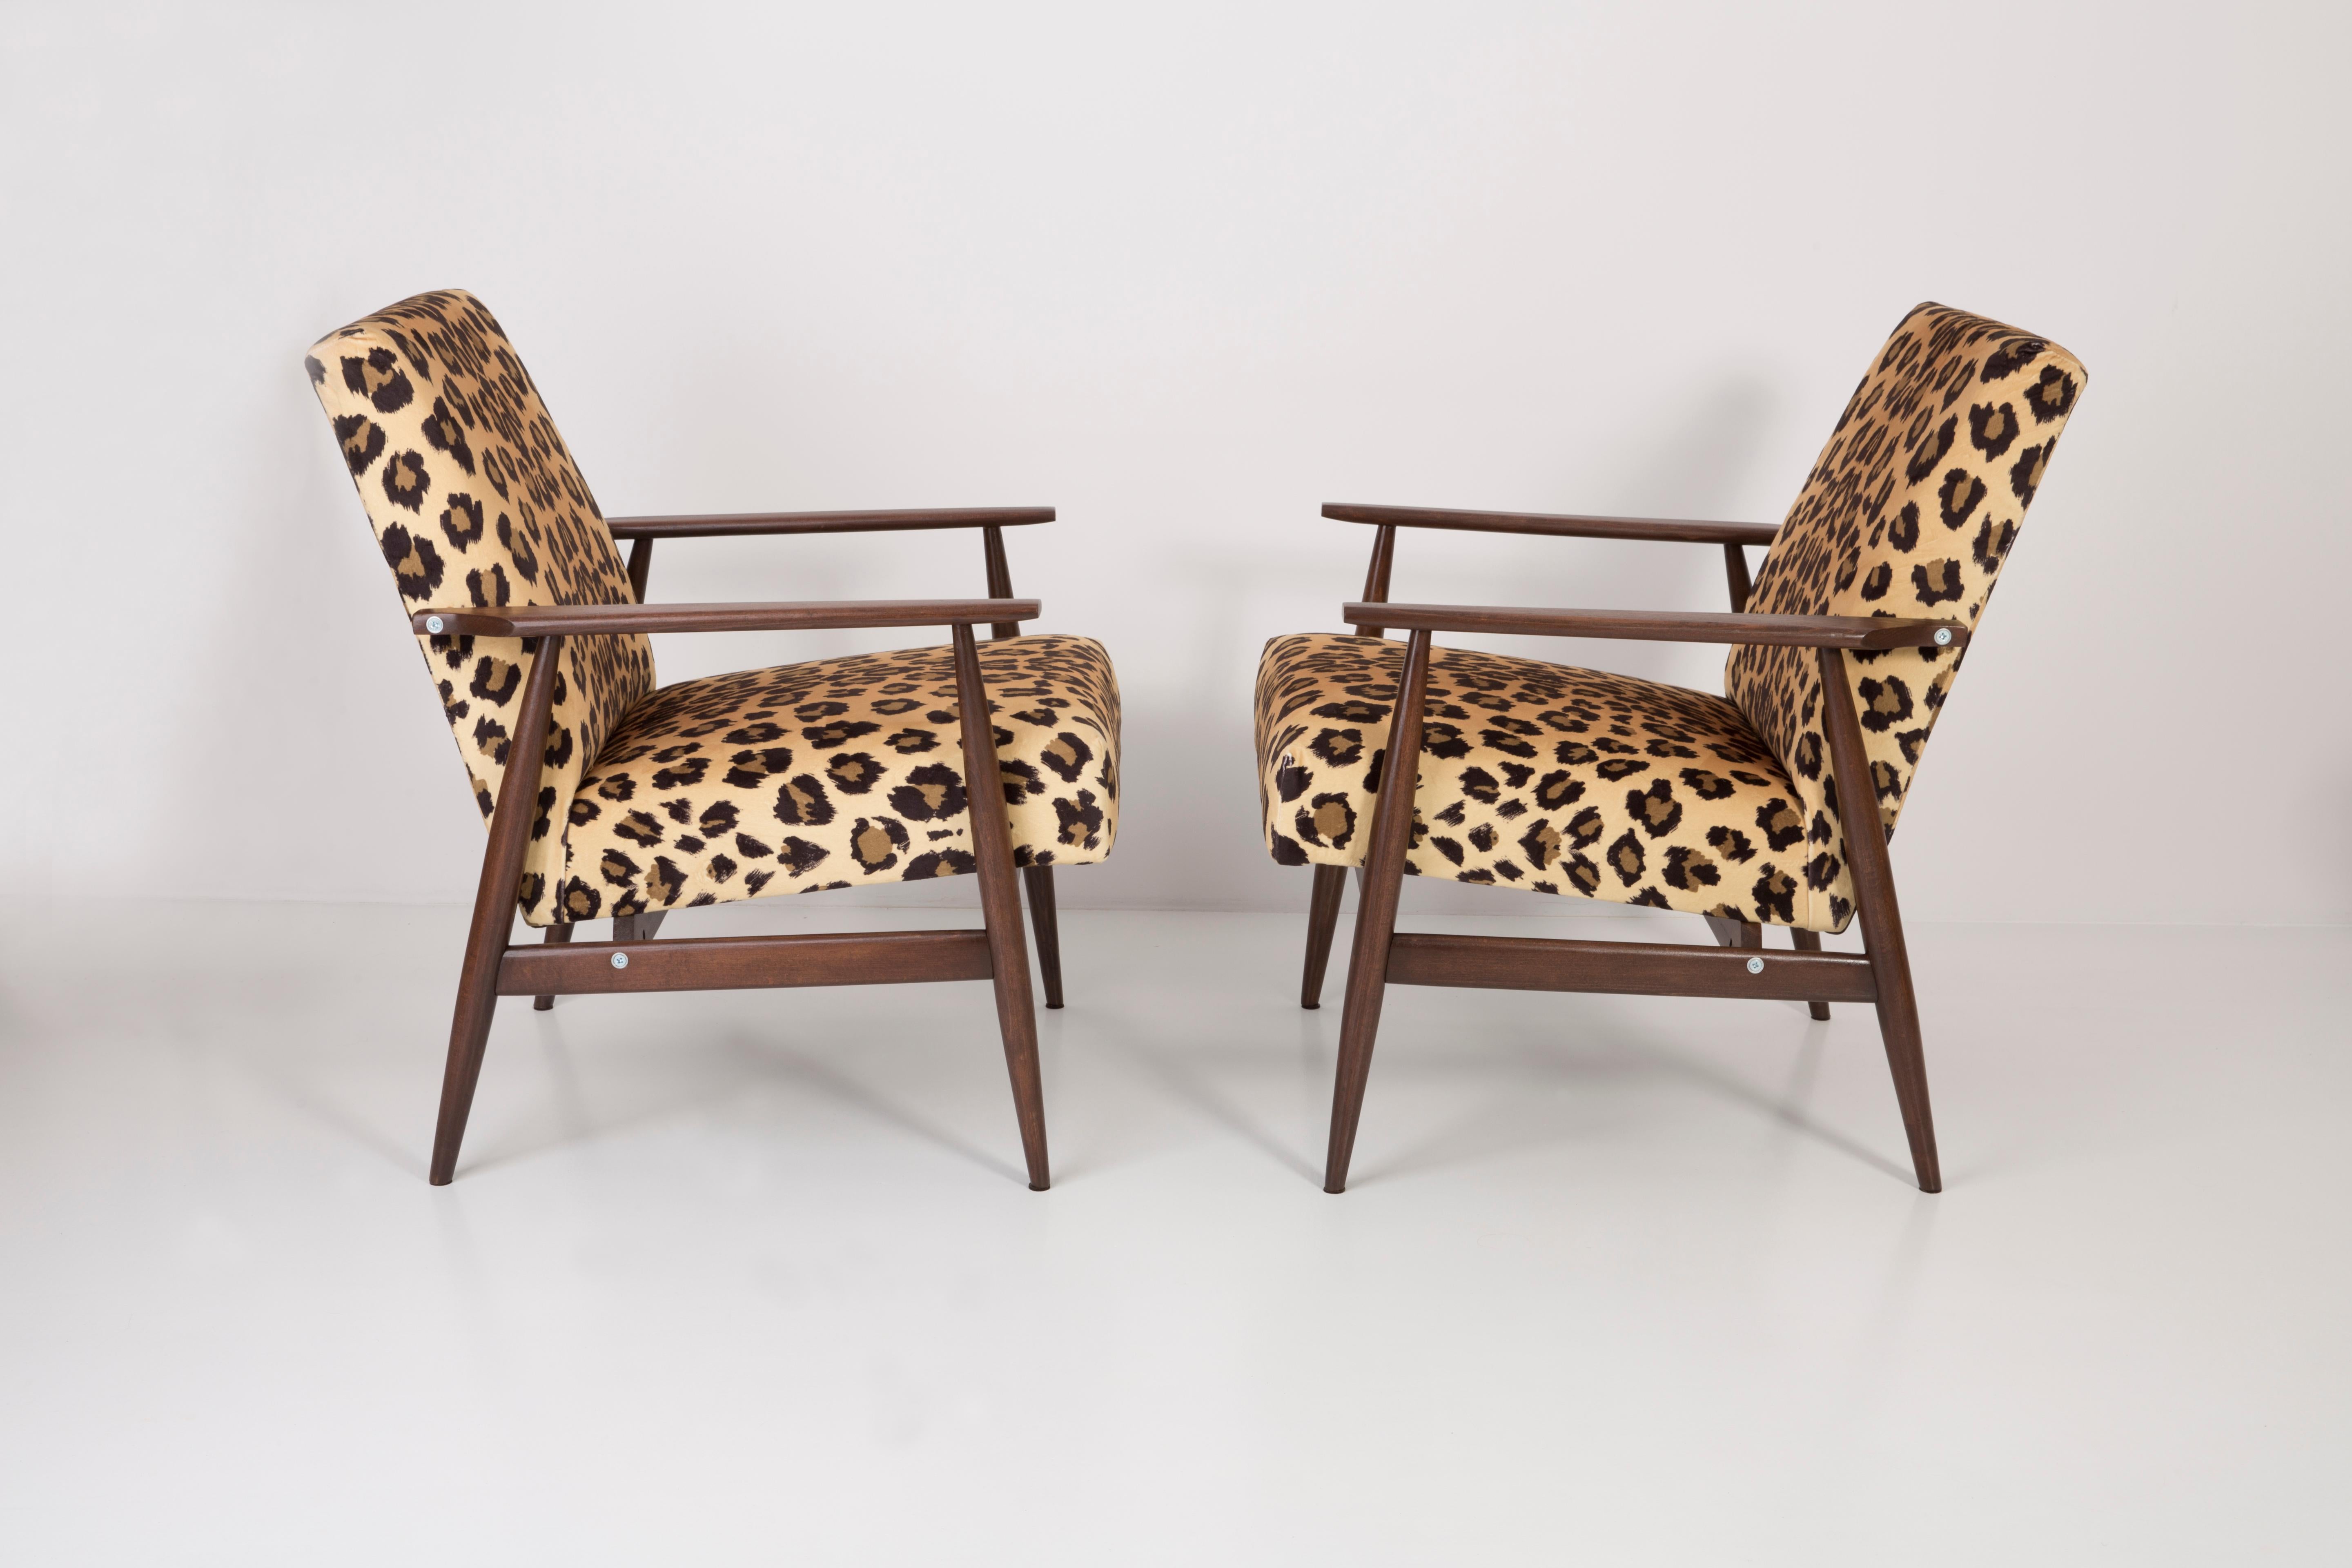 A beautiful, restored armchairs designed by Henryk Lis. Furniture after full carpentry and upholstery renovation. The fabric, which is covered with a backrest and a seat, is a high-quality Italian velvet upholstery printed in leopard pattern. The